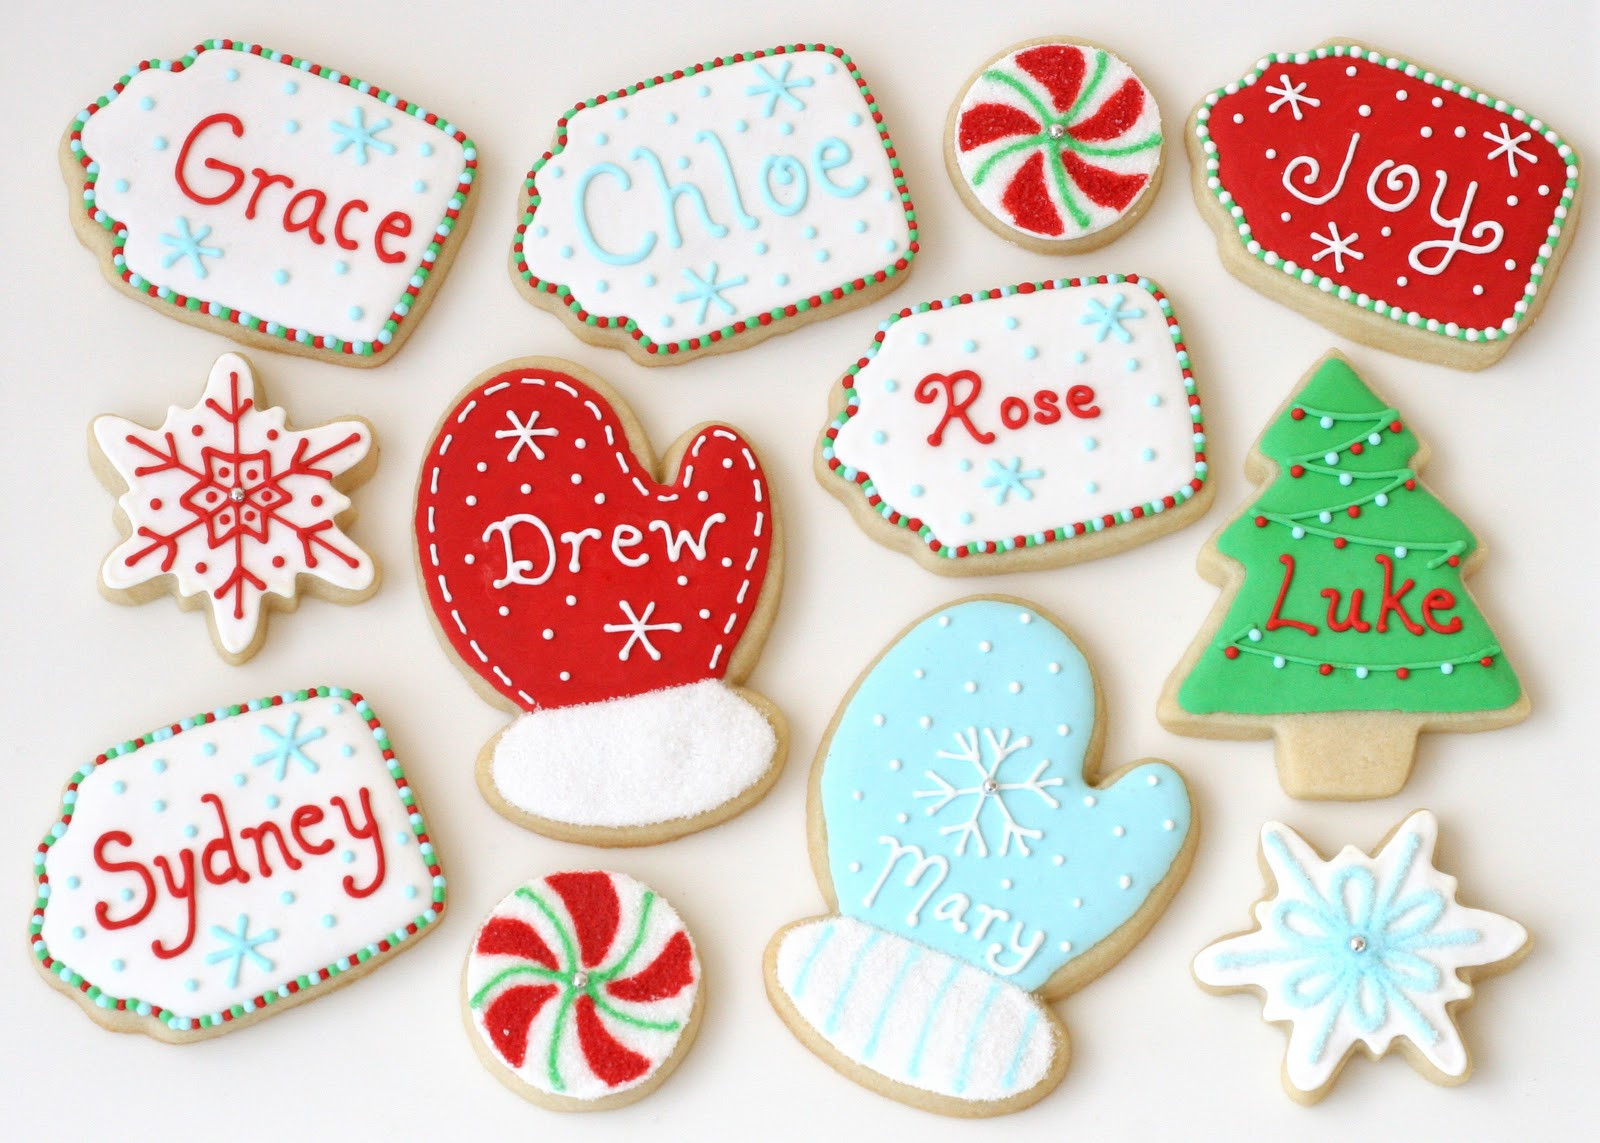 Christmas Cookies Decorated
 Glorious Treats Christmas Cookies Galore